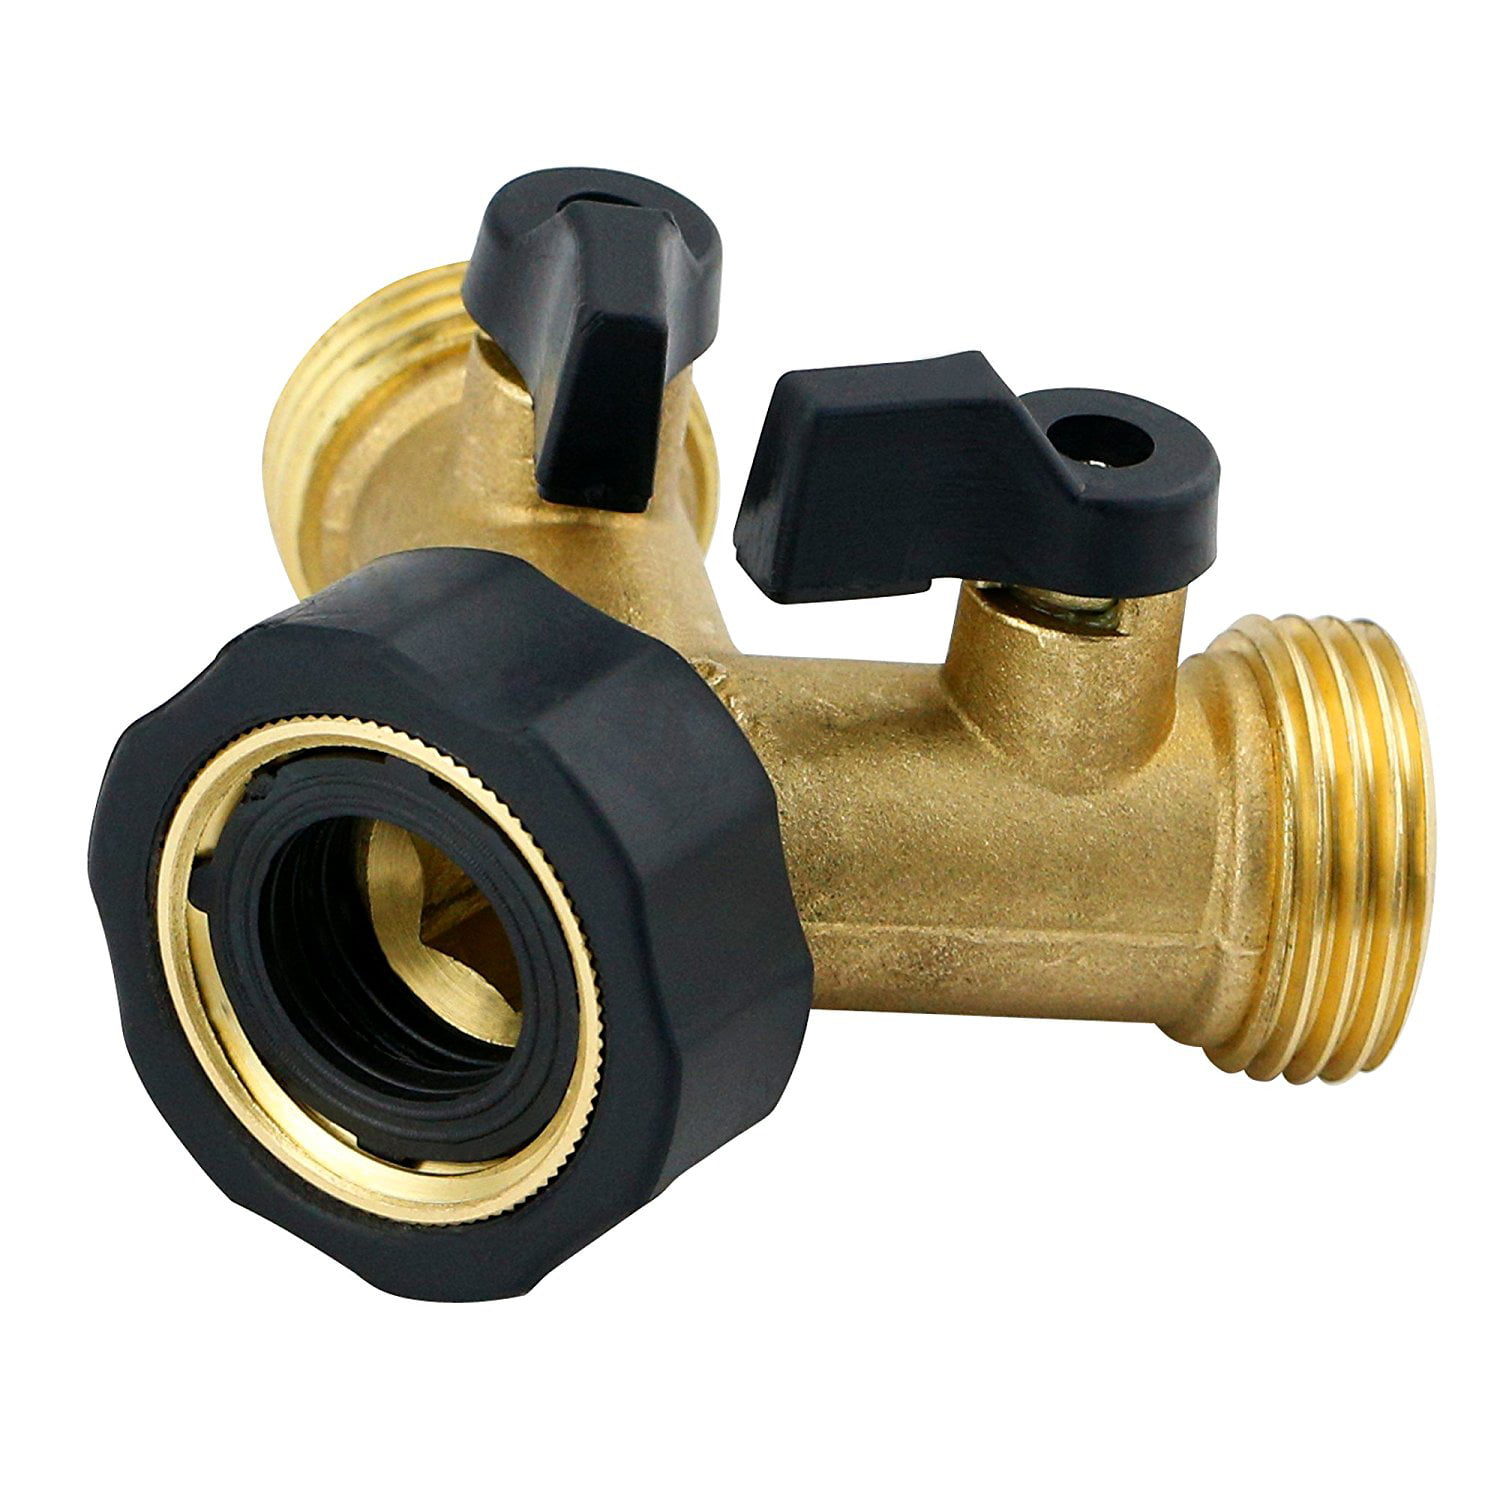 Green 2 Way Garden Hose Splitter Body Metal Y Hose Connector with 3/4 Connector and Rubberized Grip Easy to Open Long Handles y Valve 2 Kink Free 8cm Hose Savers 